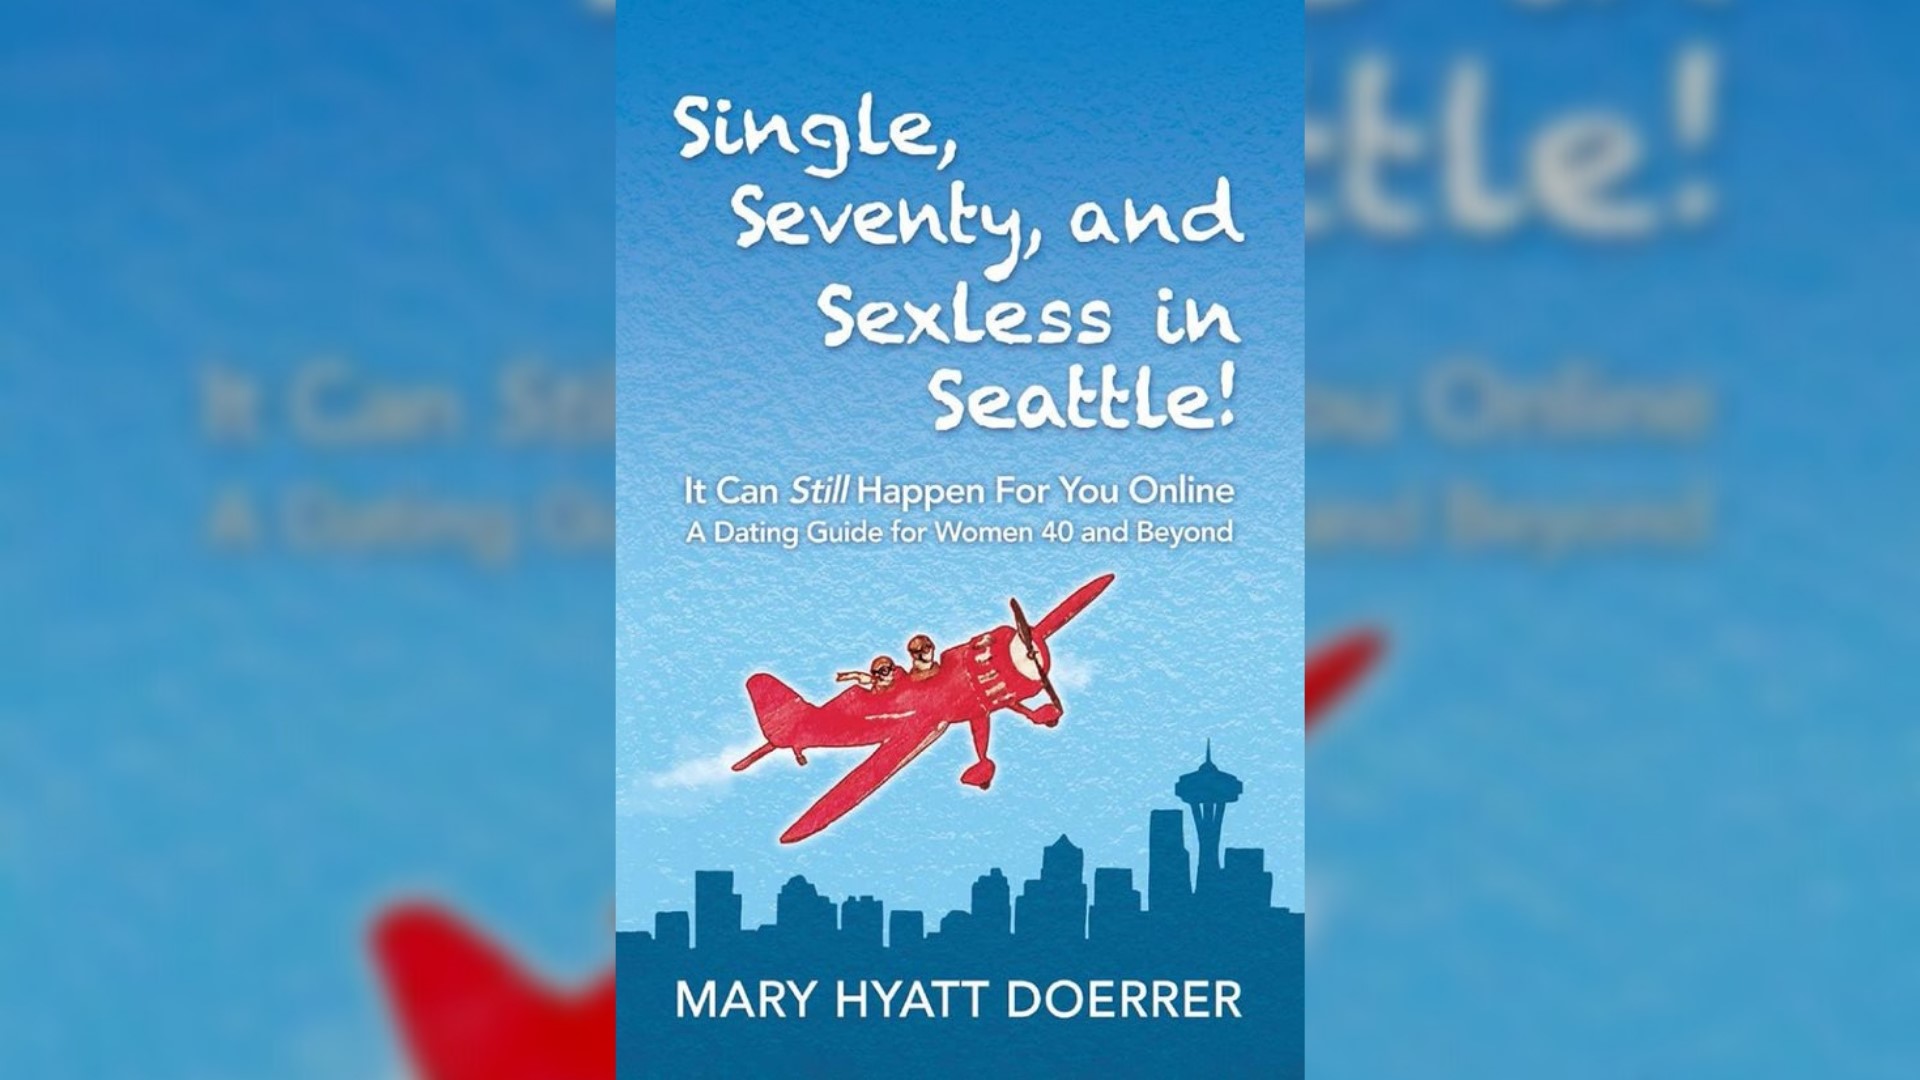 Author Mary Hyatt Doerrer overcame her fears, created a dating profile at 70, and wrote a book about her experience.